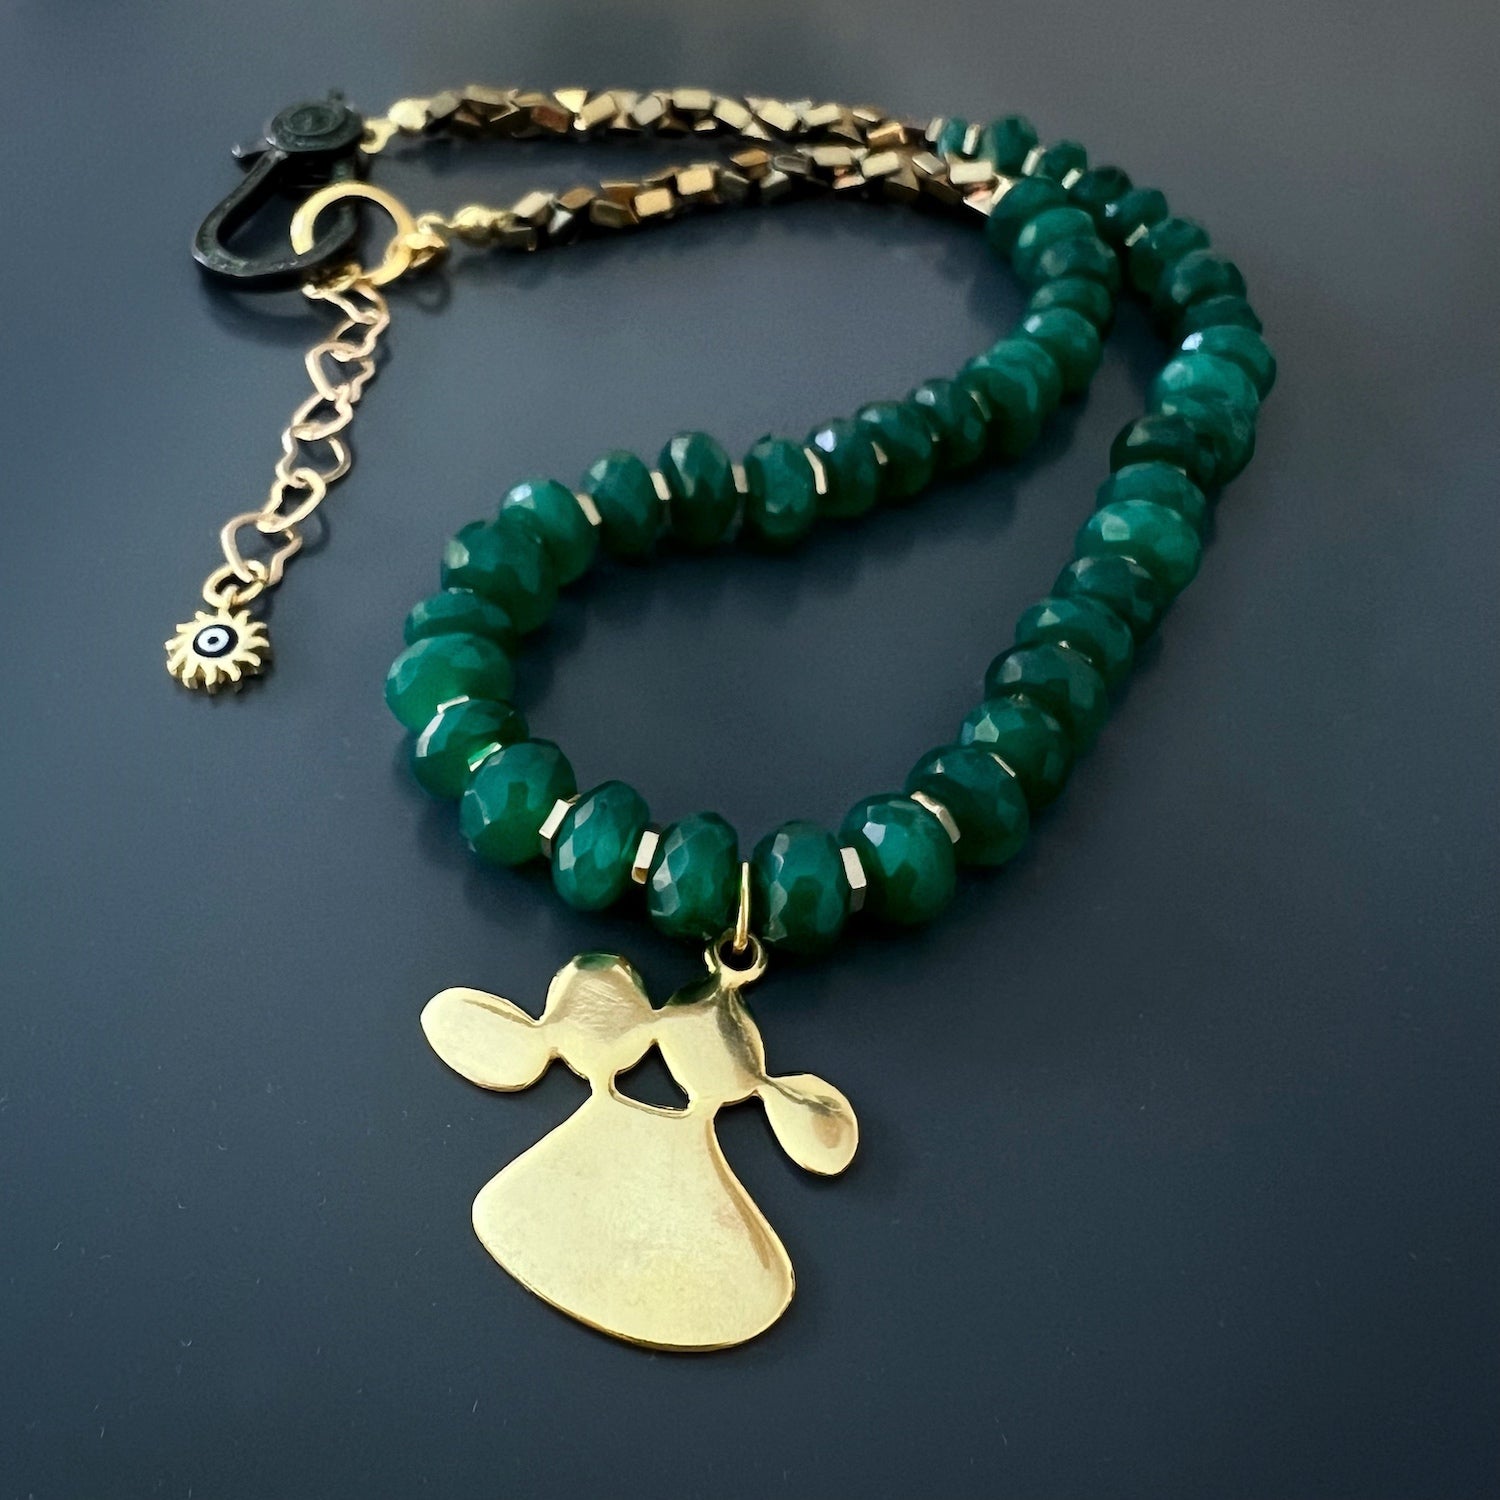 The Mother and Daughter Jade Necklace, as seen in the image, radiates love and devotion, with its stunning jade beads and the beautiful mother and daughter pendant.